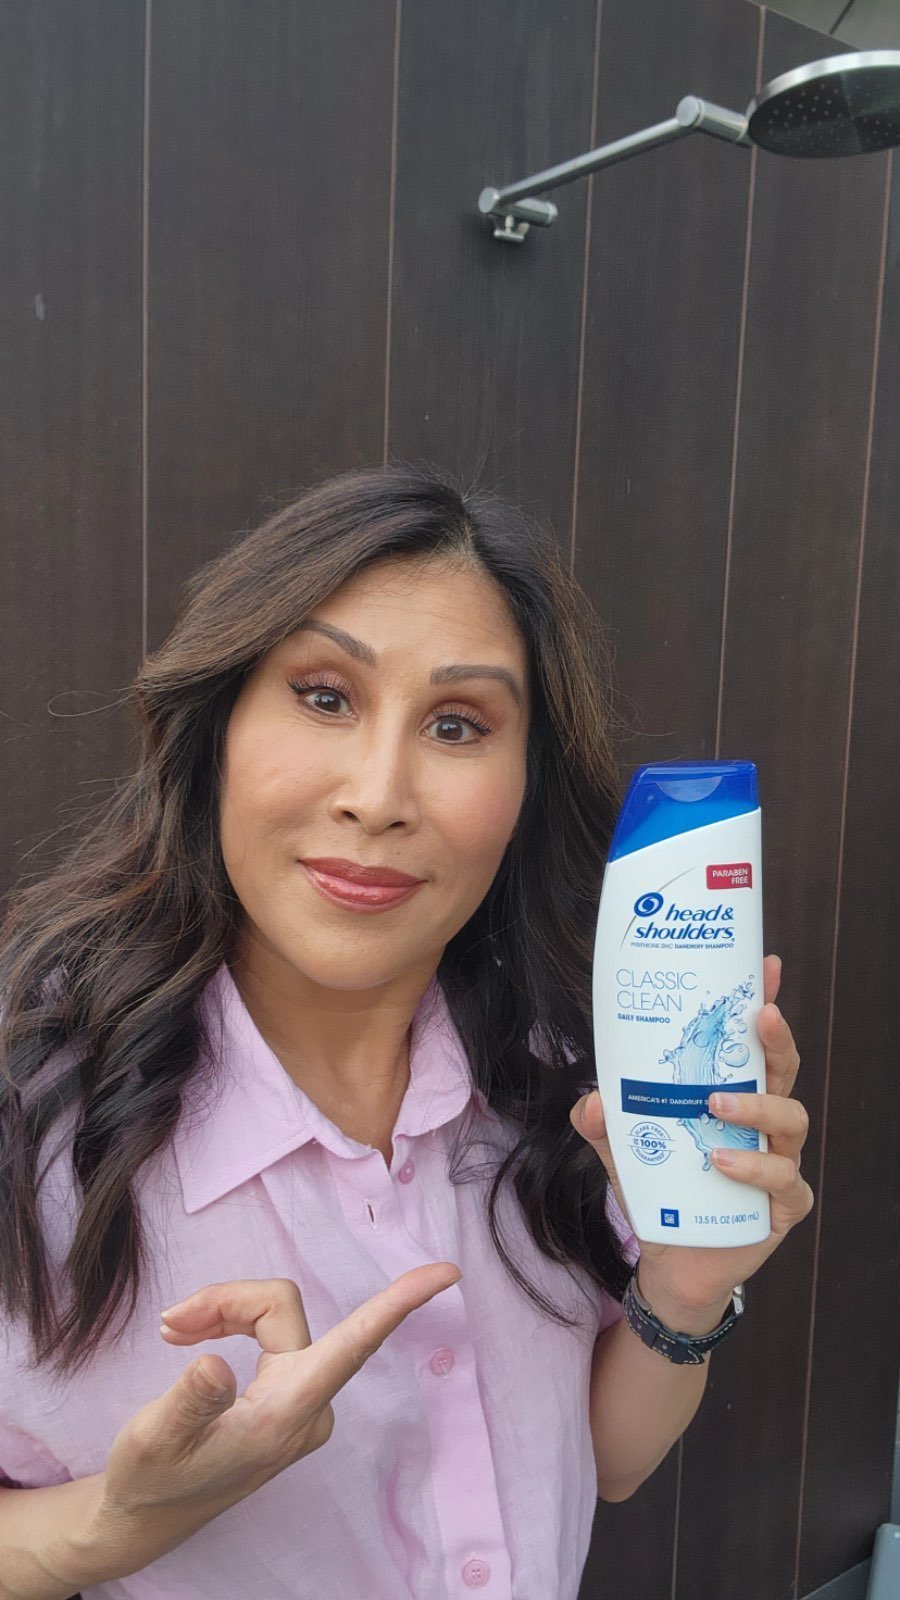 HEAD & SHOULDERS AS FACE WASH? — Dr. Jessica